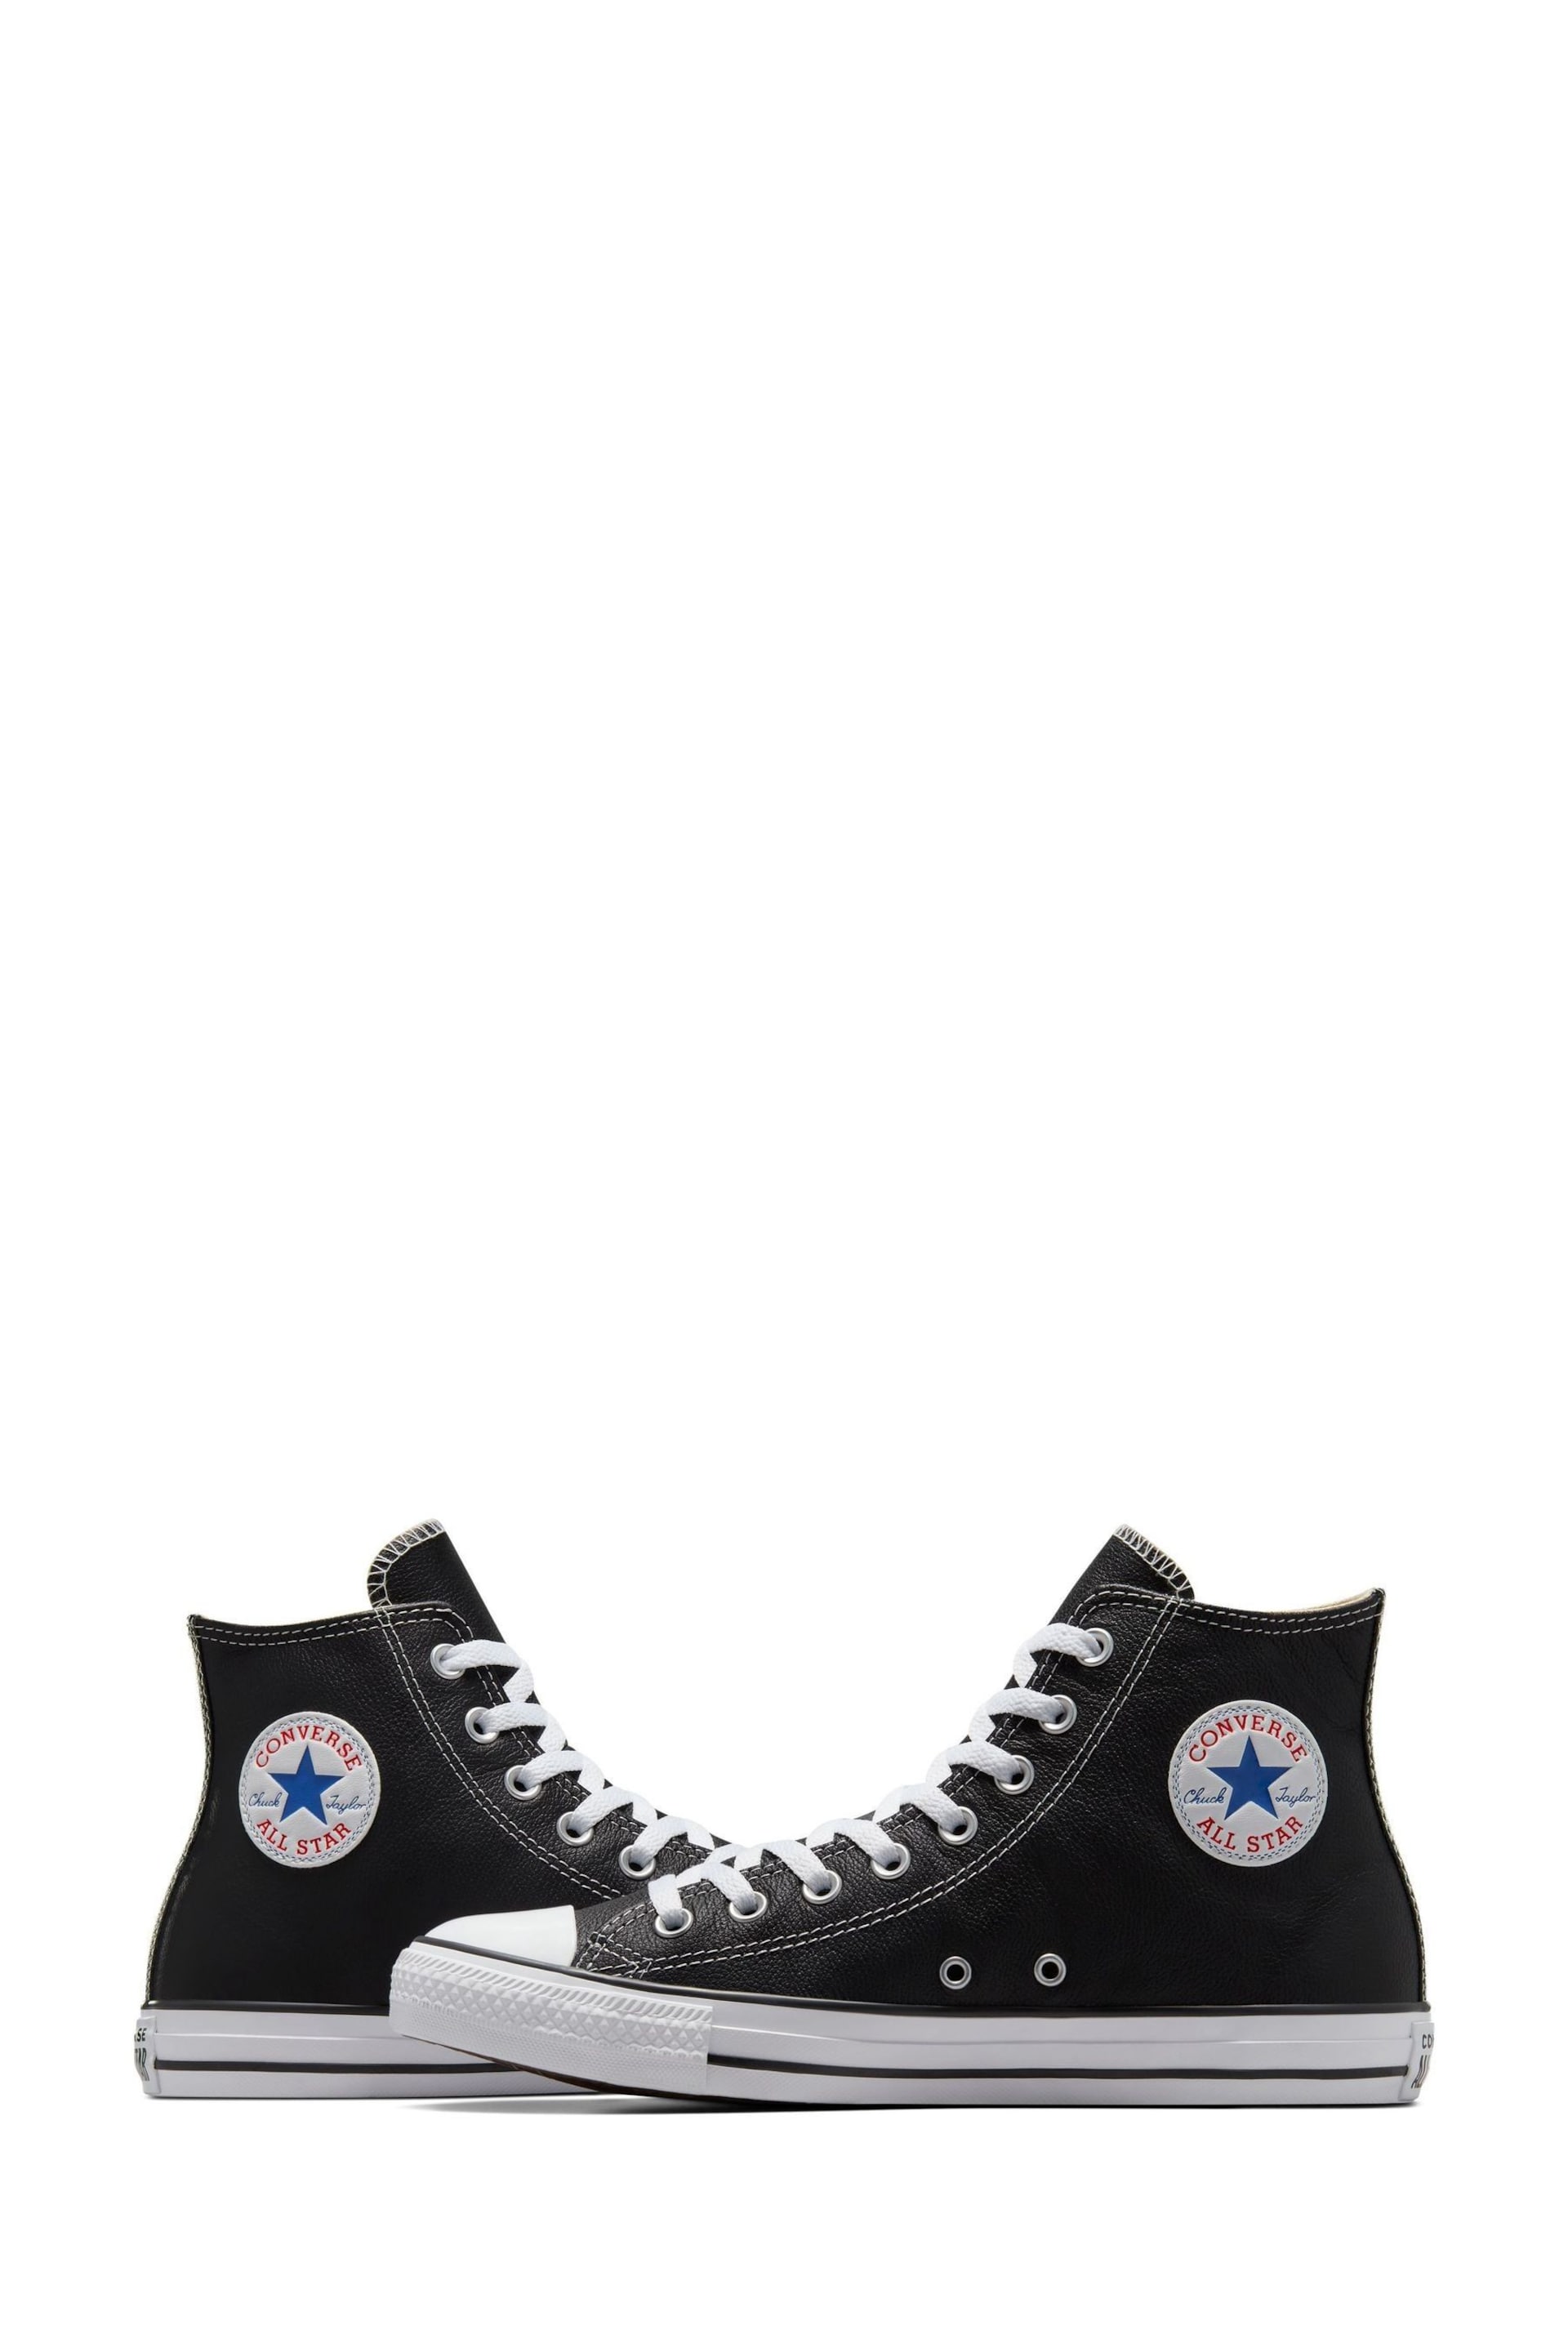 Converse Black Leather Chuck Taylor All Star High Top Trainers - Image 8 of 11